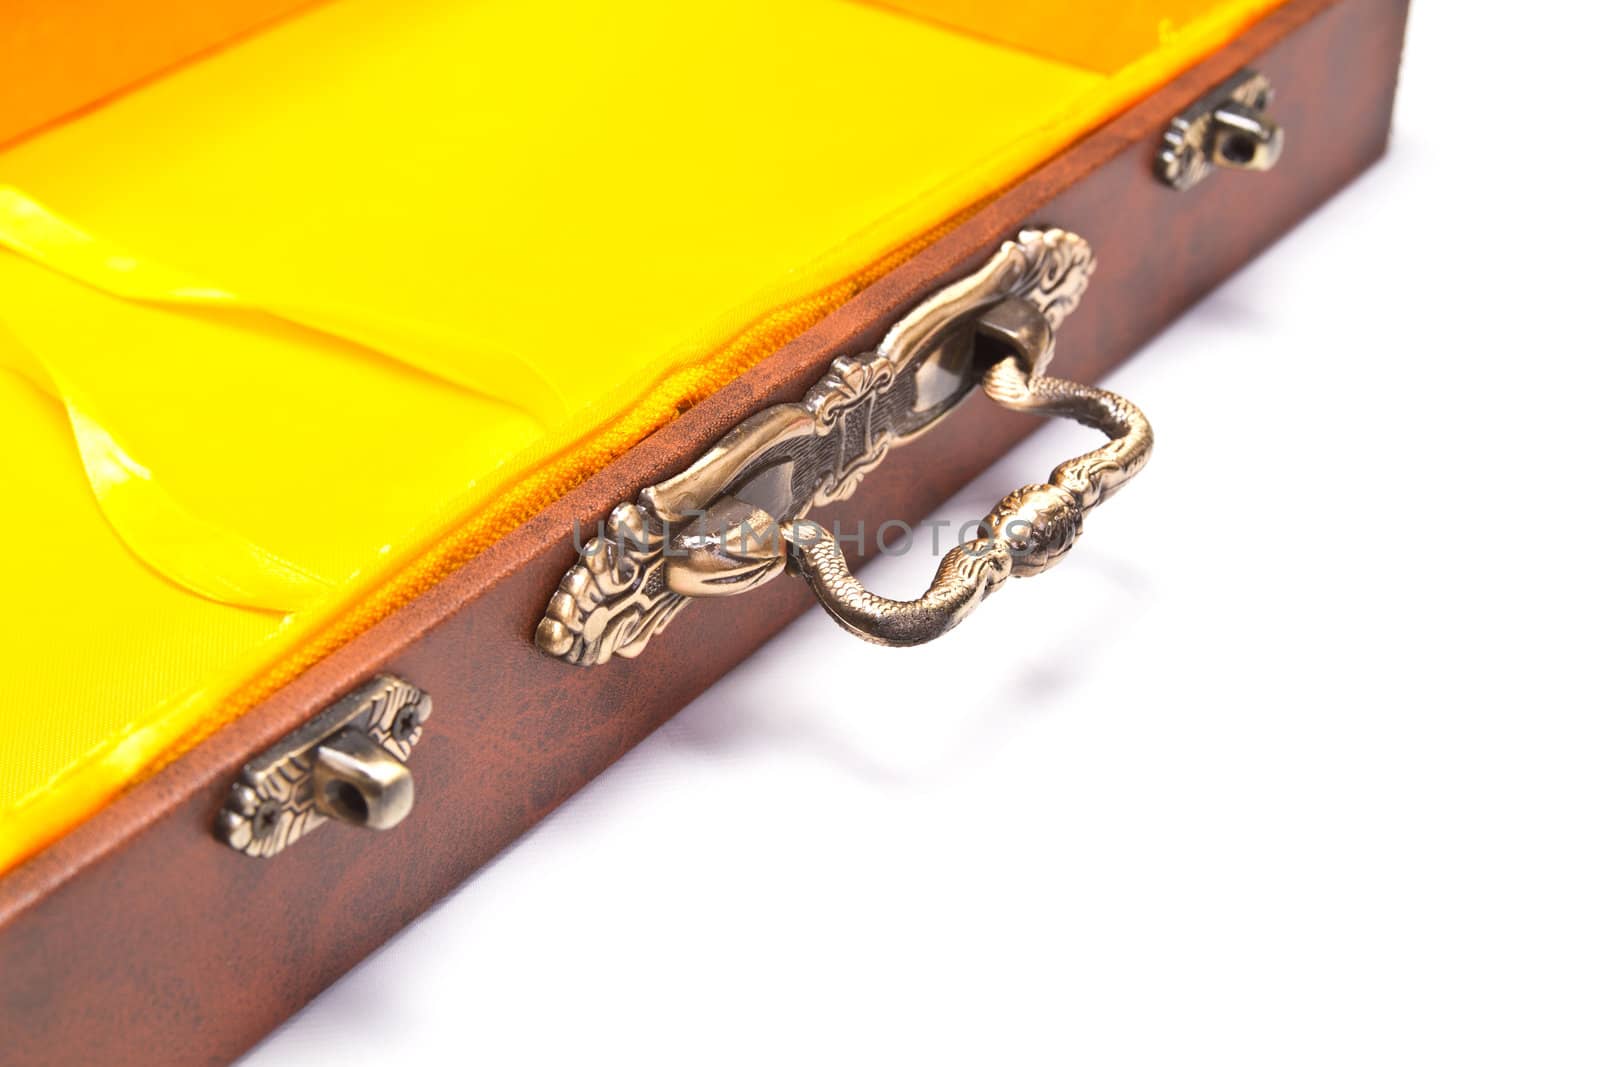 empty box with yellow inner lining on white surface with detail on handle and locks